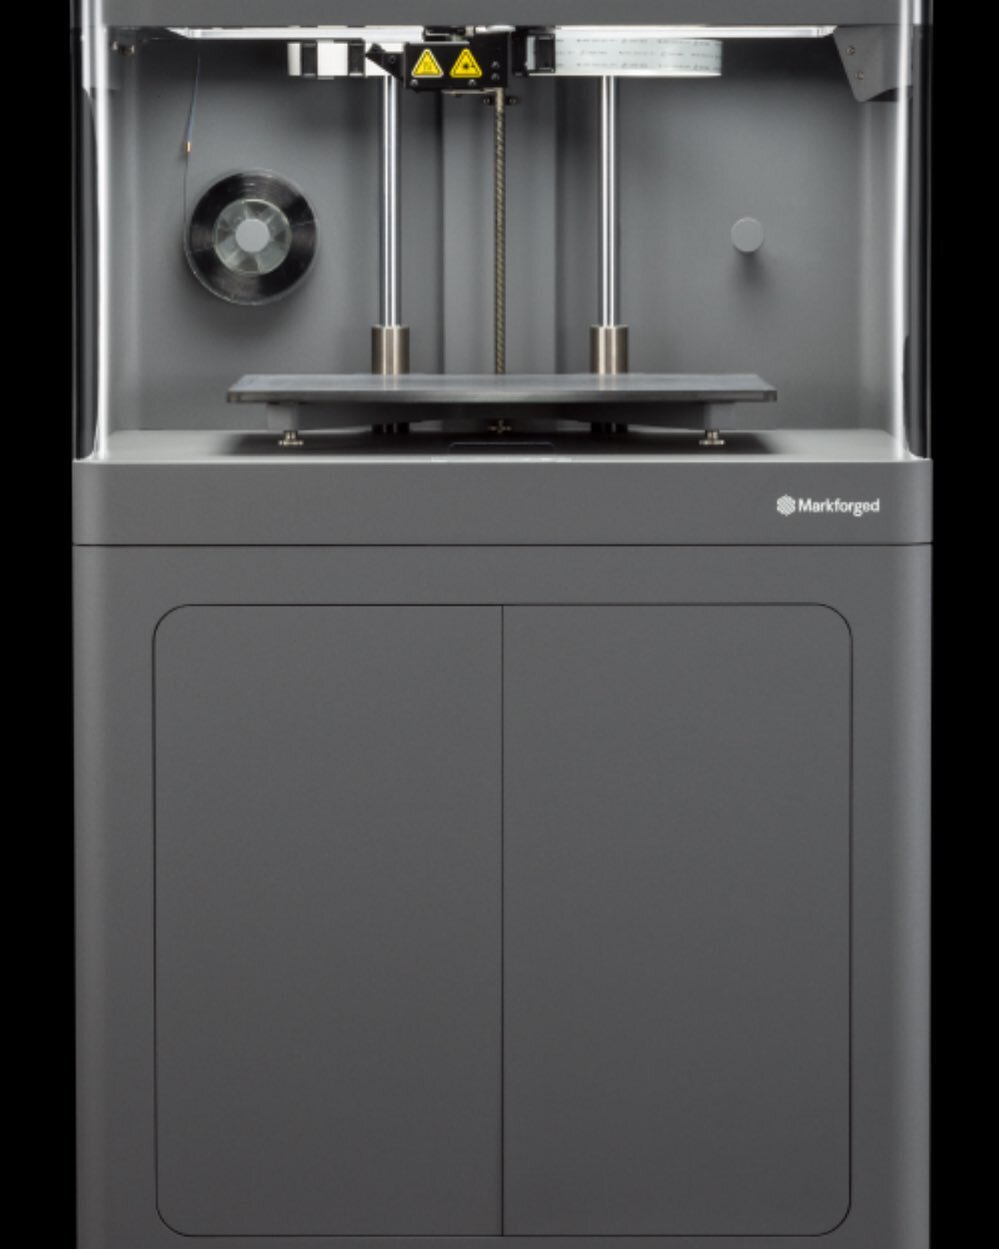 The Markforged X7 composite printer is now in the house! Its buddy the MetalX is due to arrive in 8 weeks time - adding copper, steel and inconel printing to our capabilities. We&rsquo;re finding it super handy for printing work holding fixtures! #ad